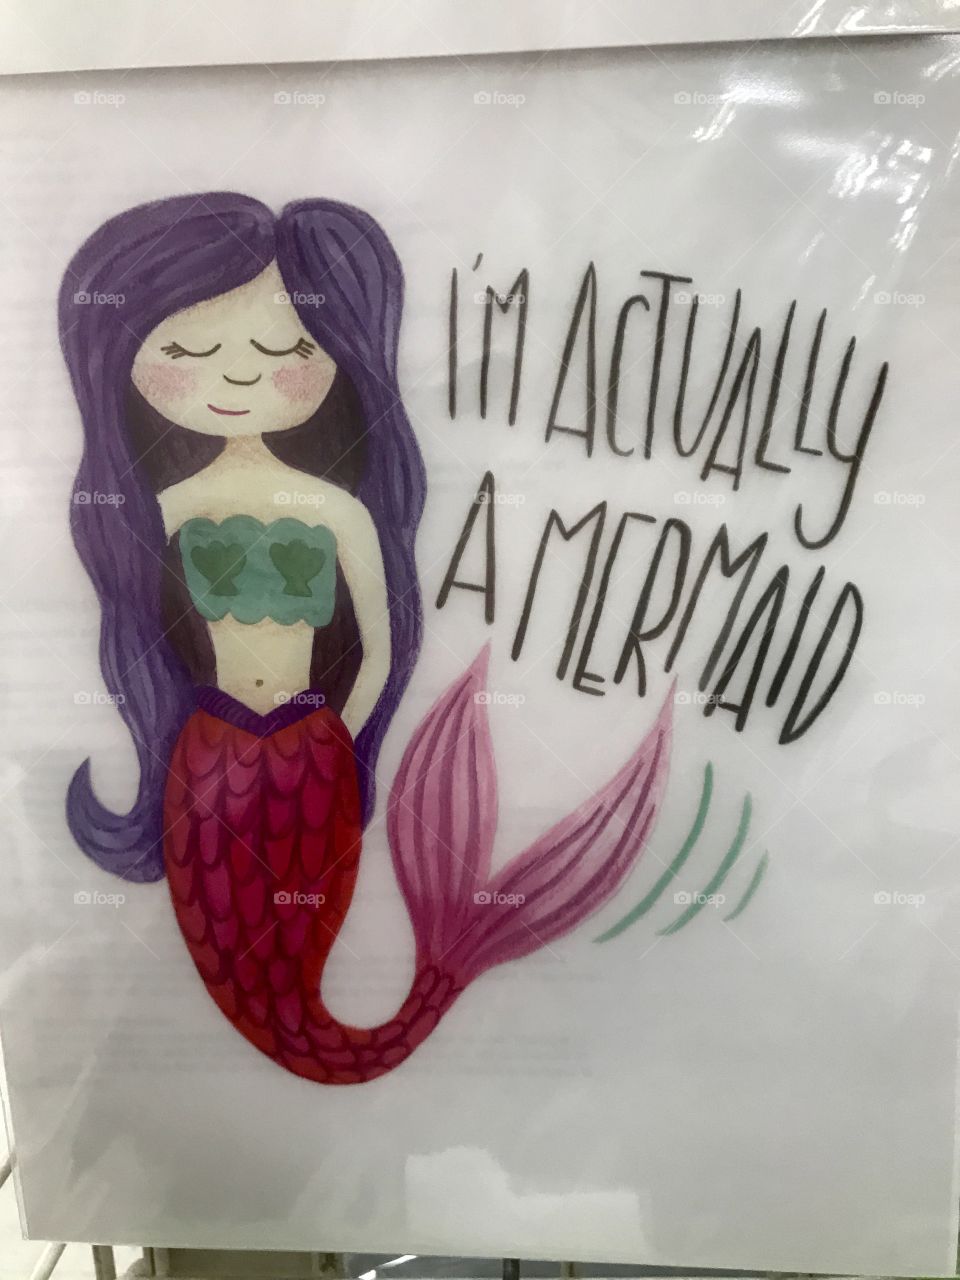 A cute image of a mermaid with long purple hair and a pink, red colored tail saying, I’m actually a mermaid. USA, America 